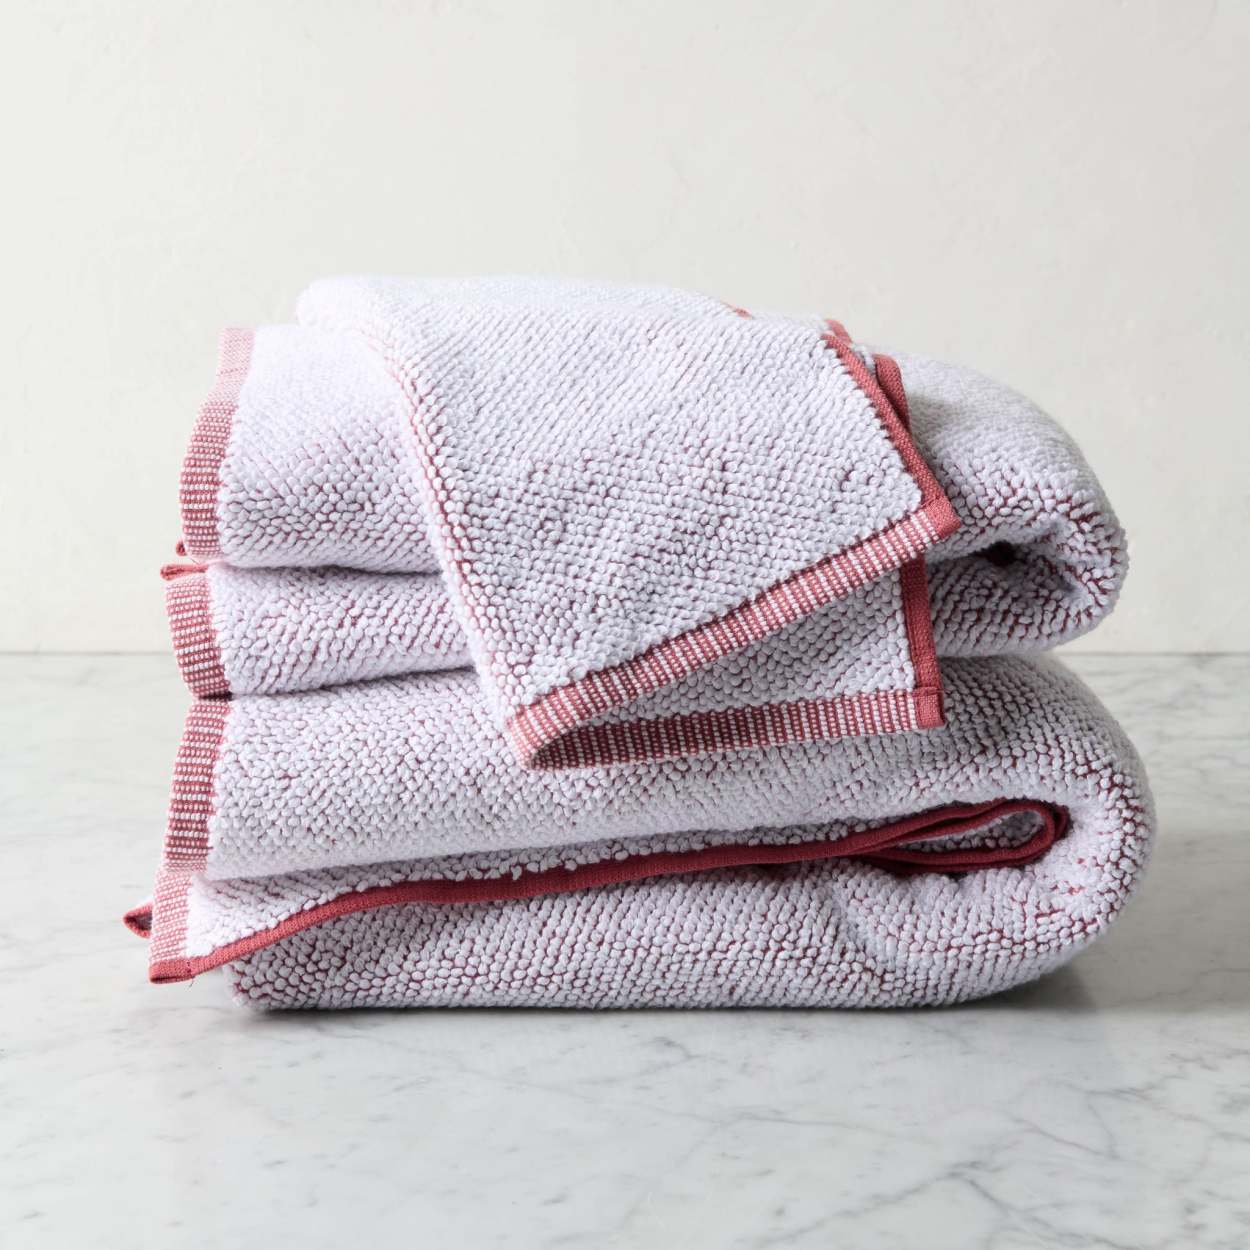 Rust and White Woven Kitchen Towel Set of 2